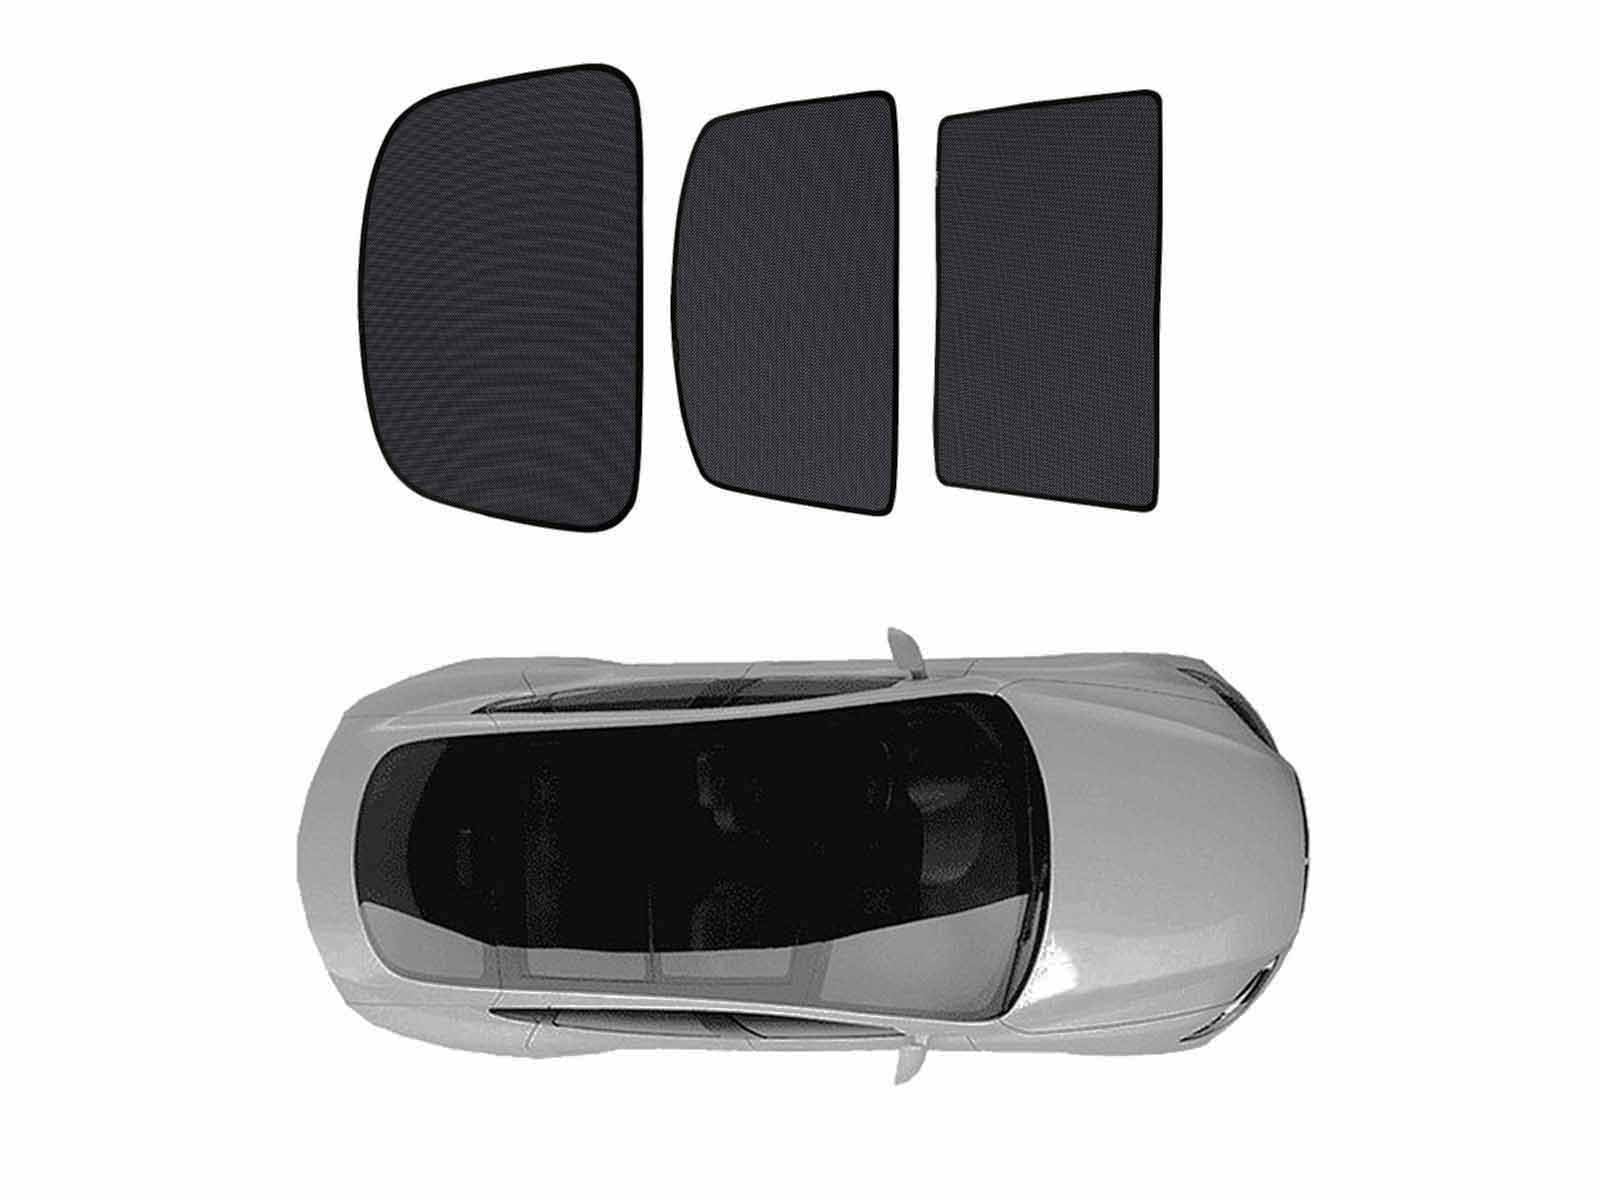 LECTRON Roof and Rear Sunshade Set for Tesla Model 3 - Double